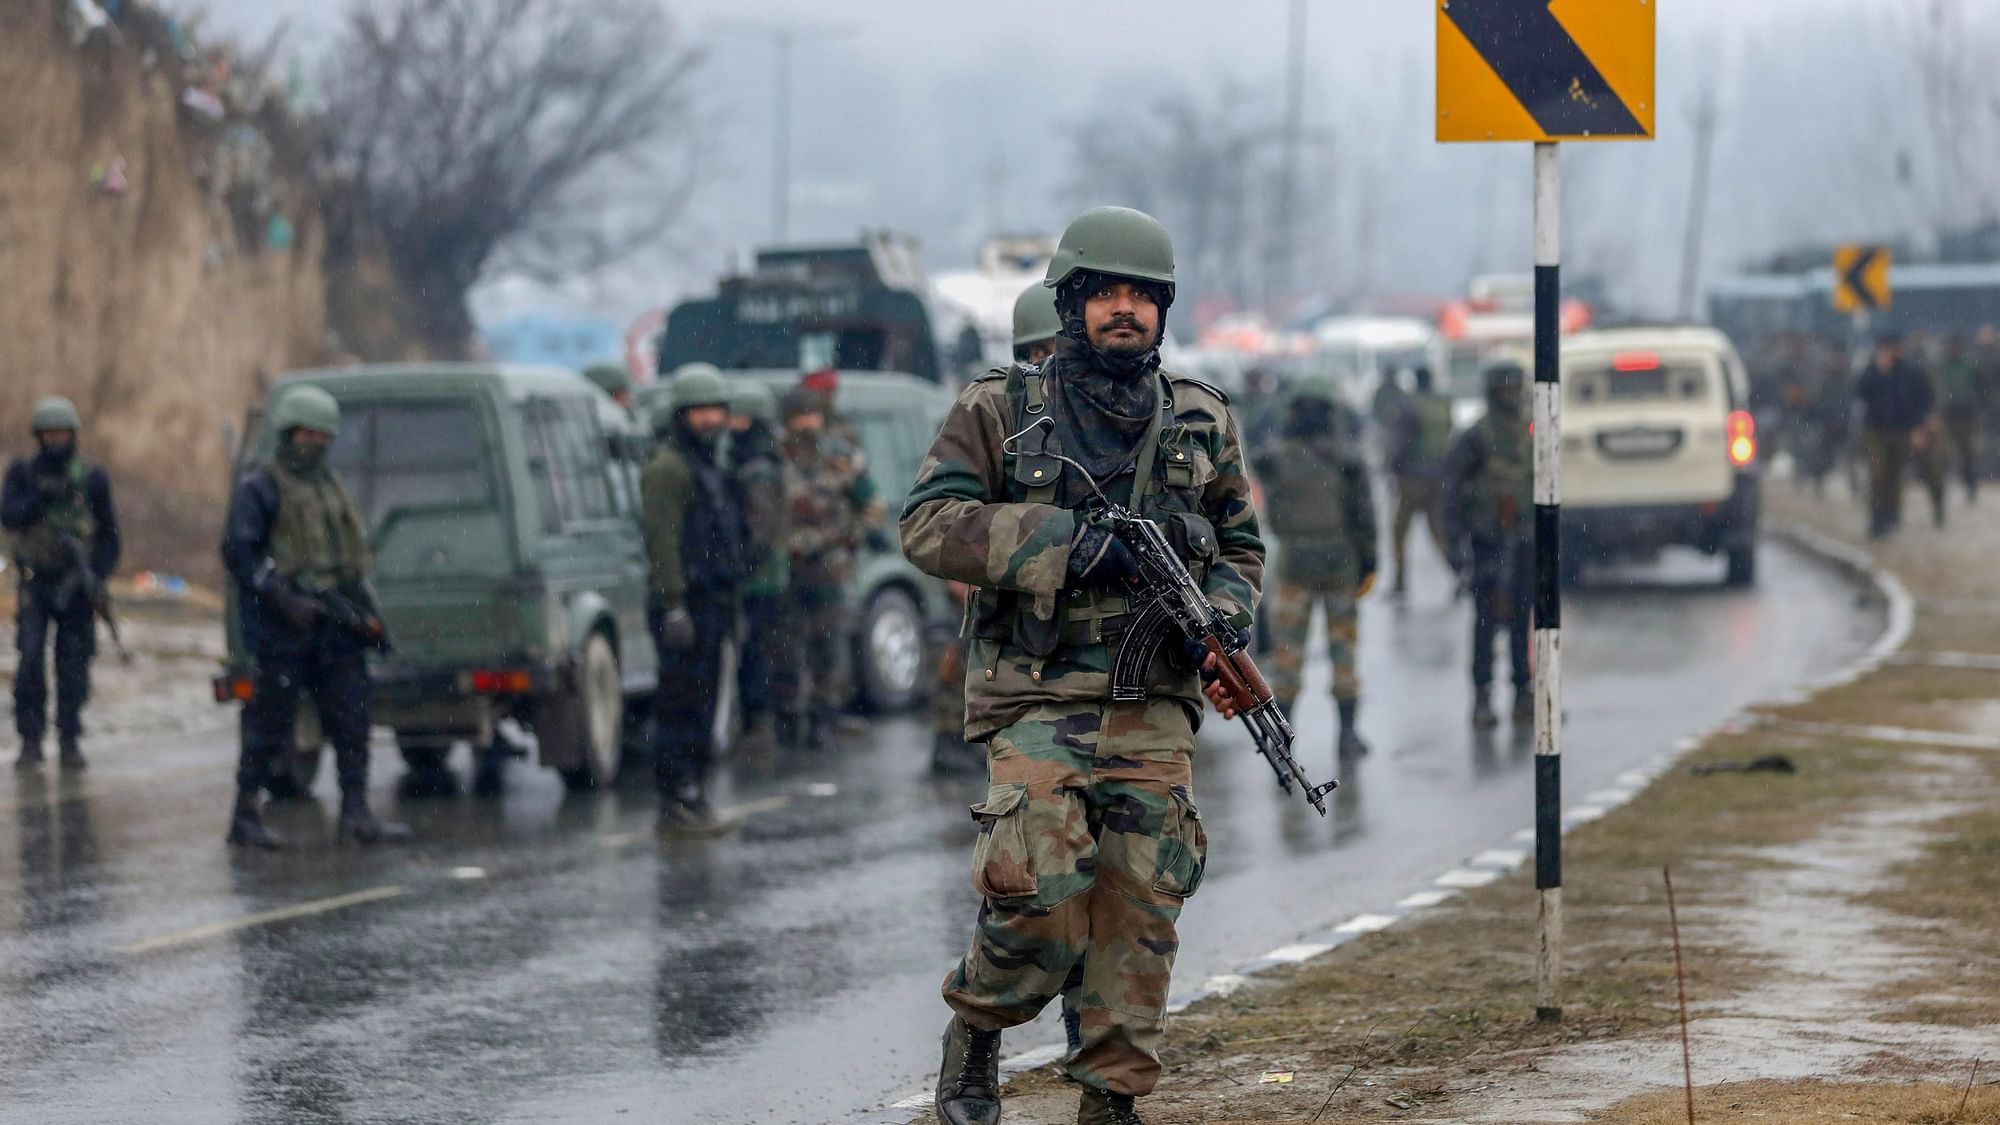 At least 39 CRPF personnel were killed in an IED blast in Jammu and Kashmir's Pulwama.